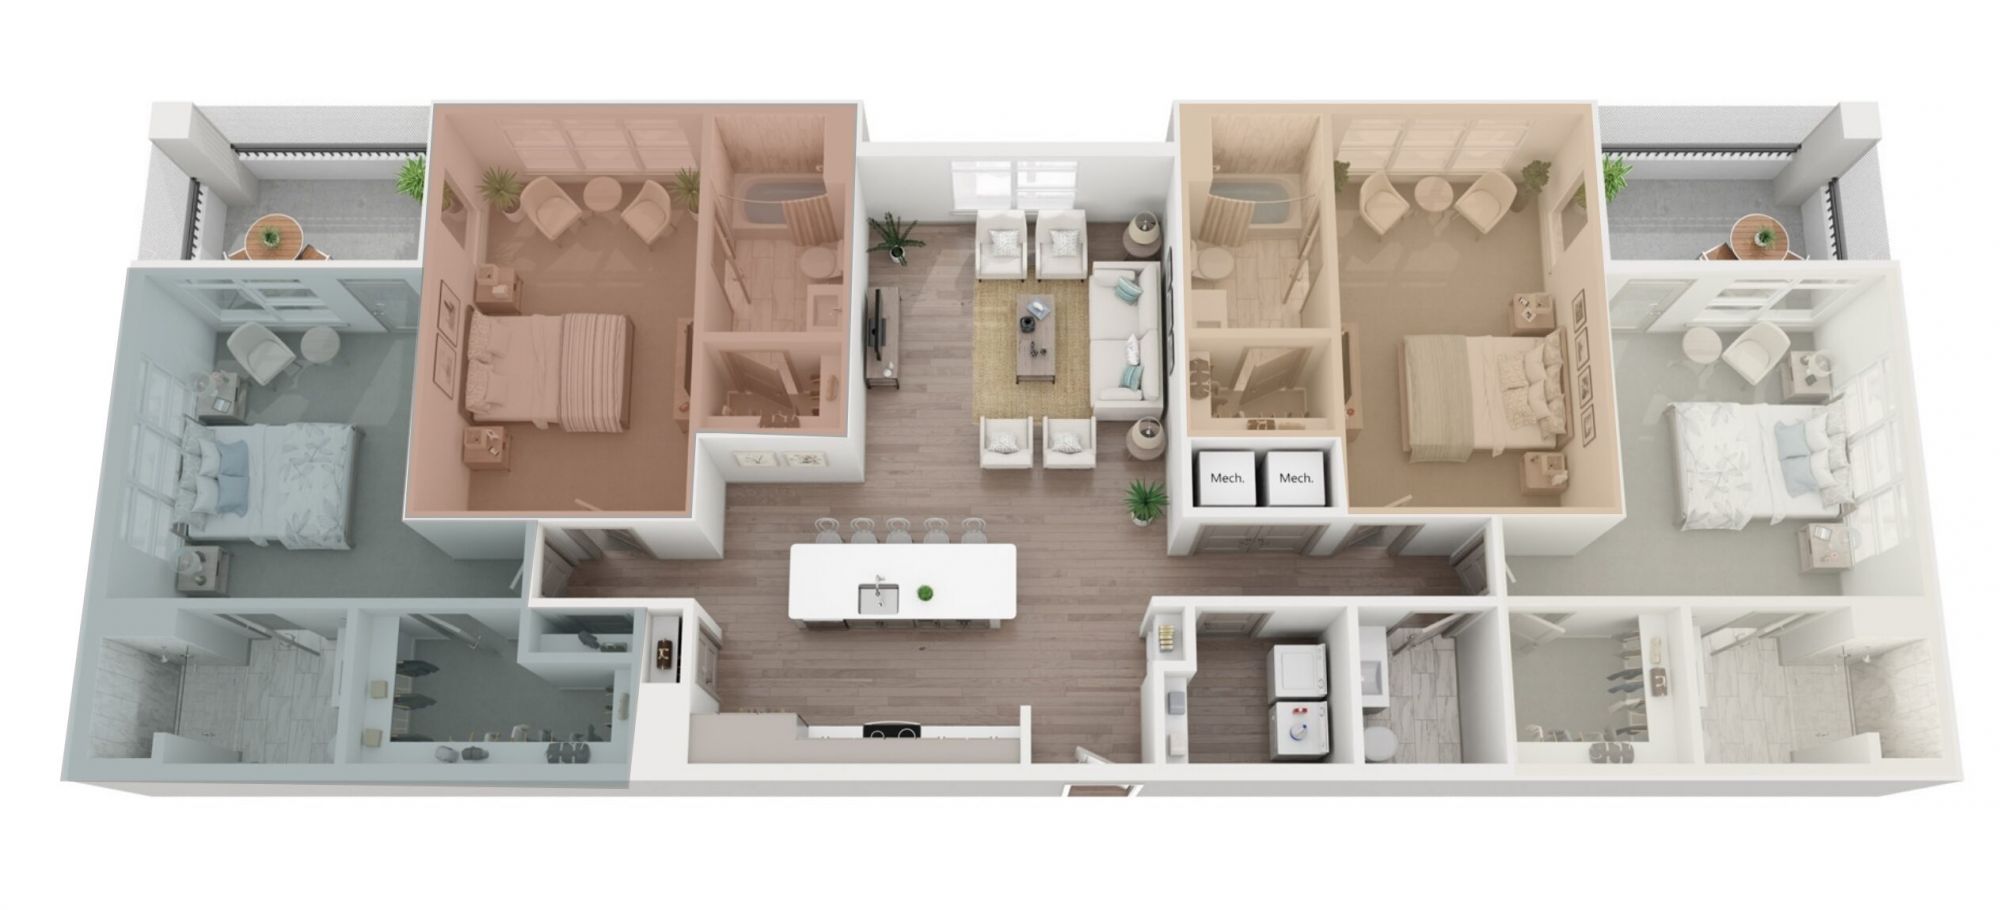 The Lucent coliving floor plan layout